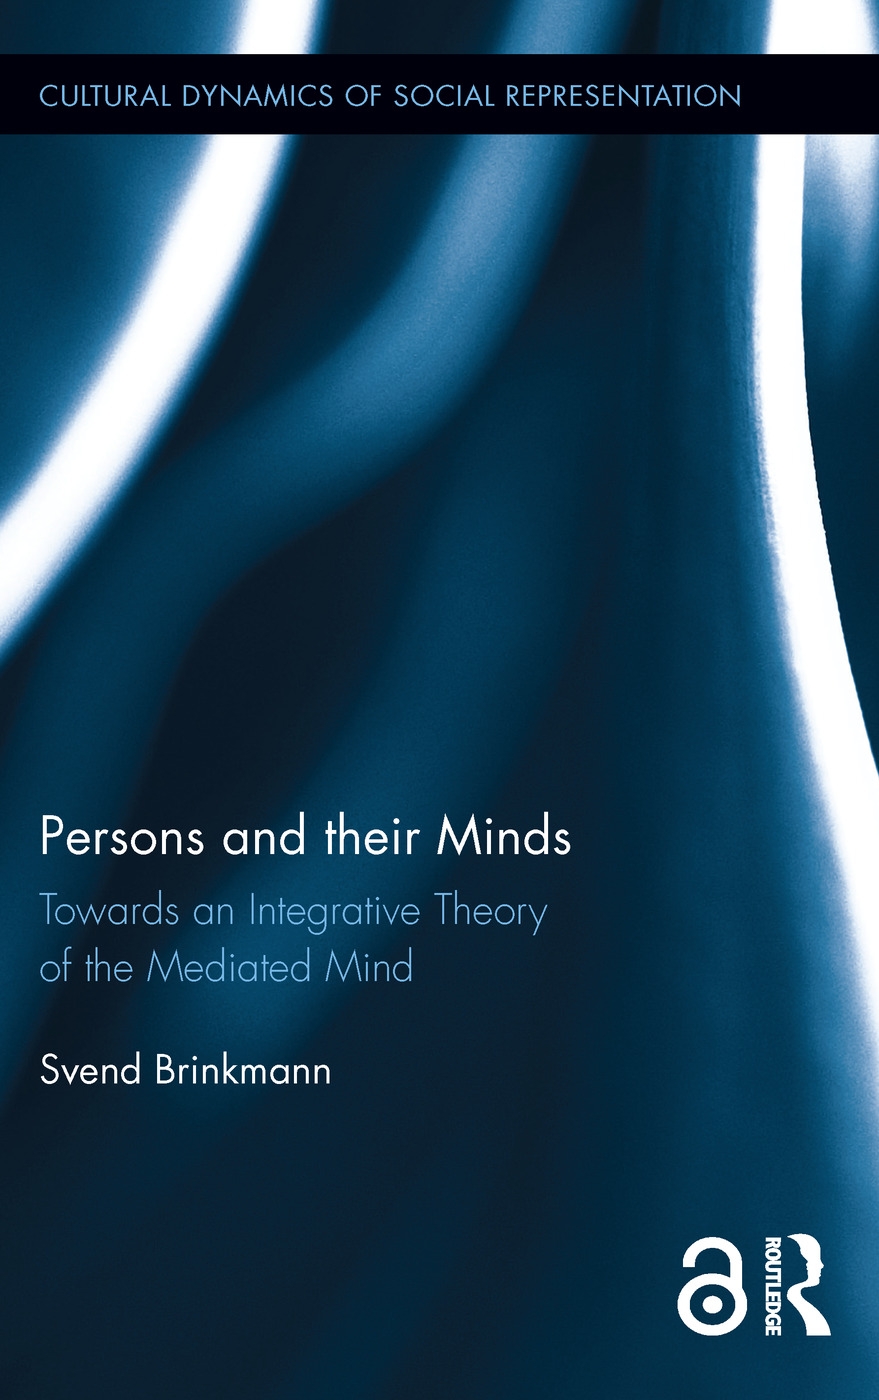 Persons and Their Minds: Towards an Integrative Theory of the Mediated Mind